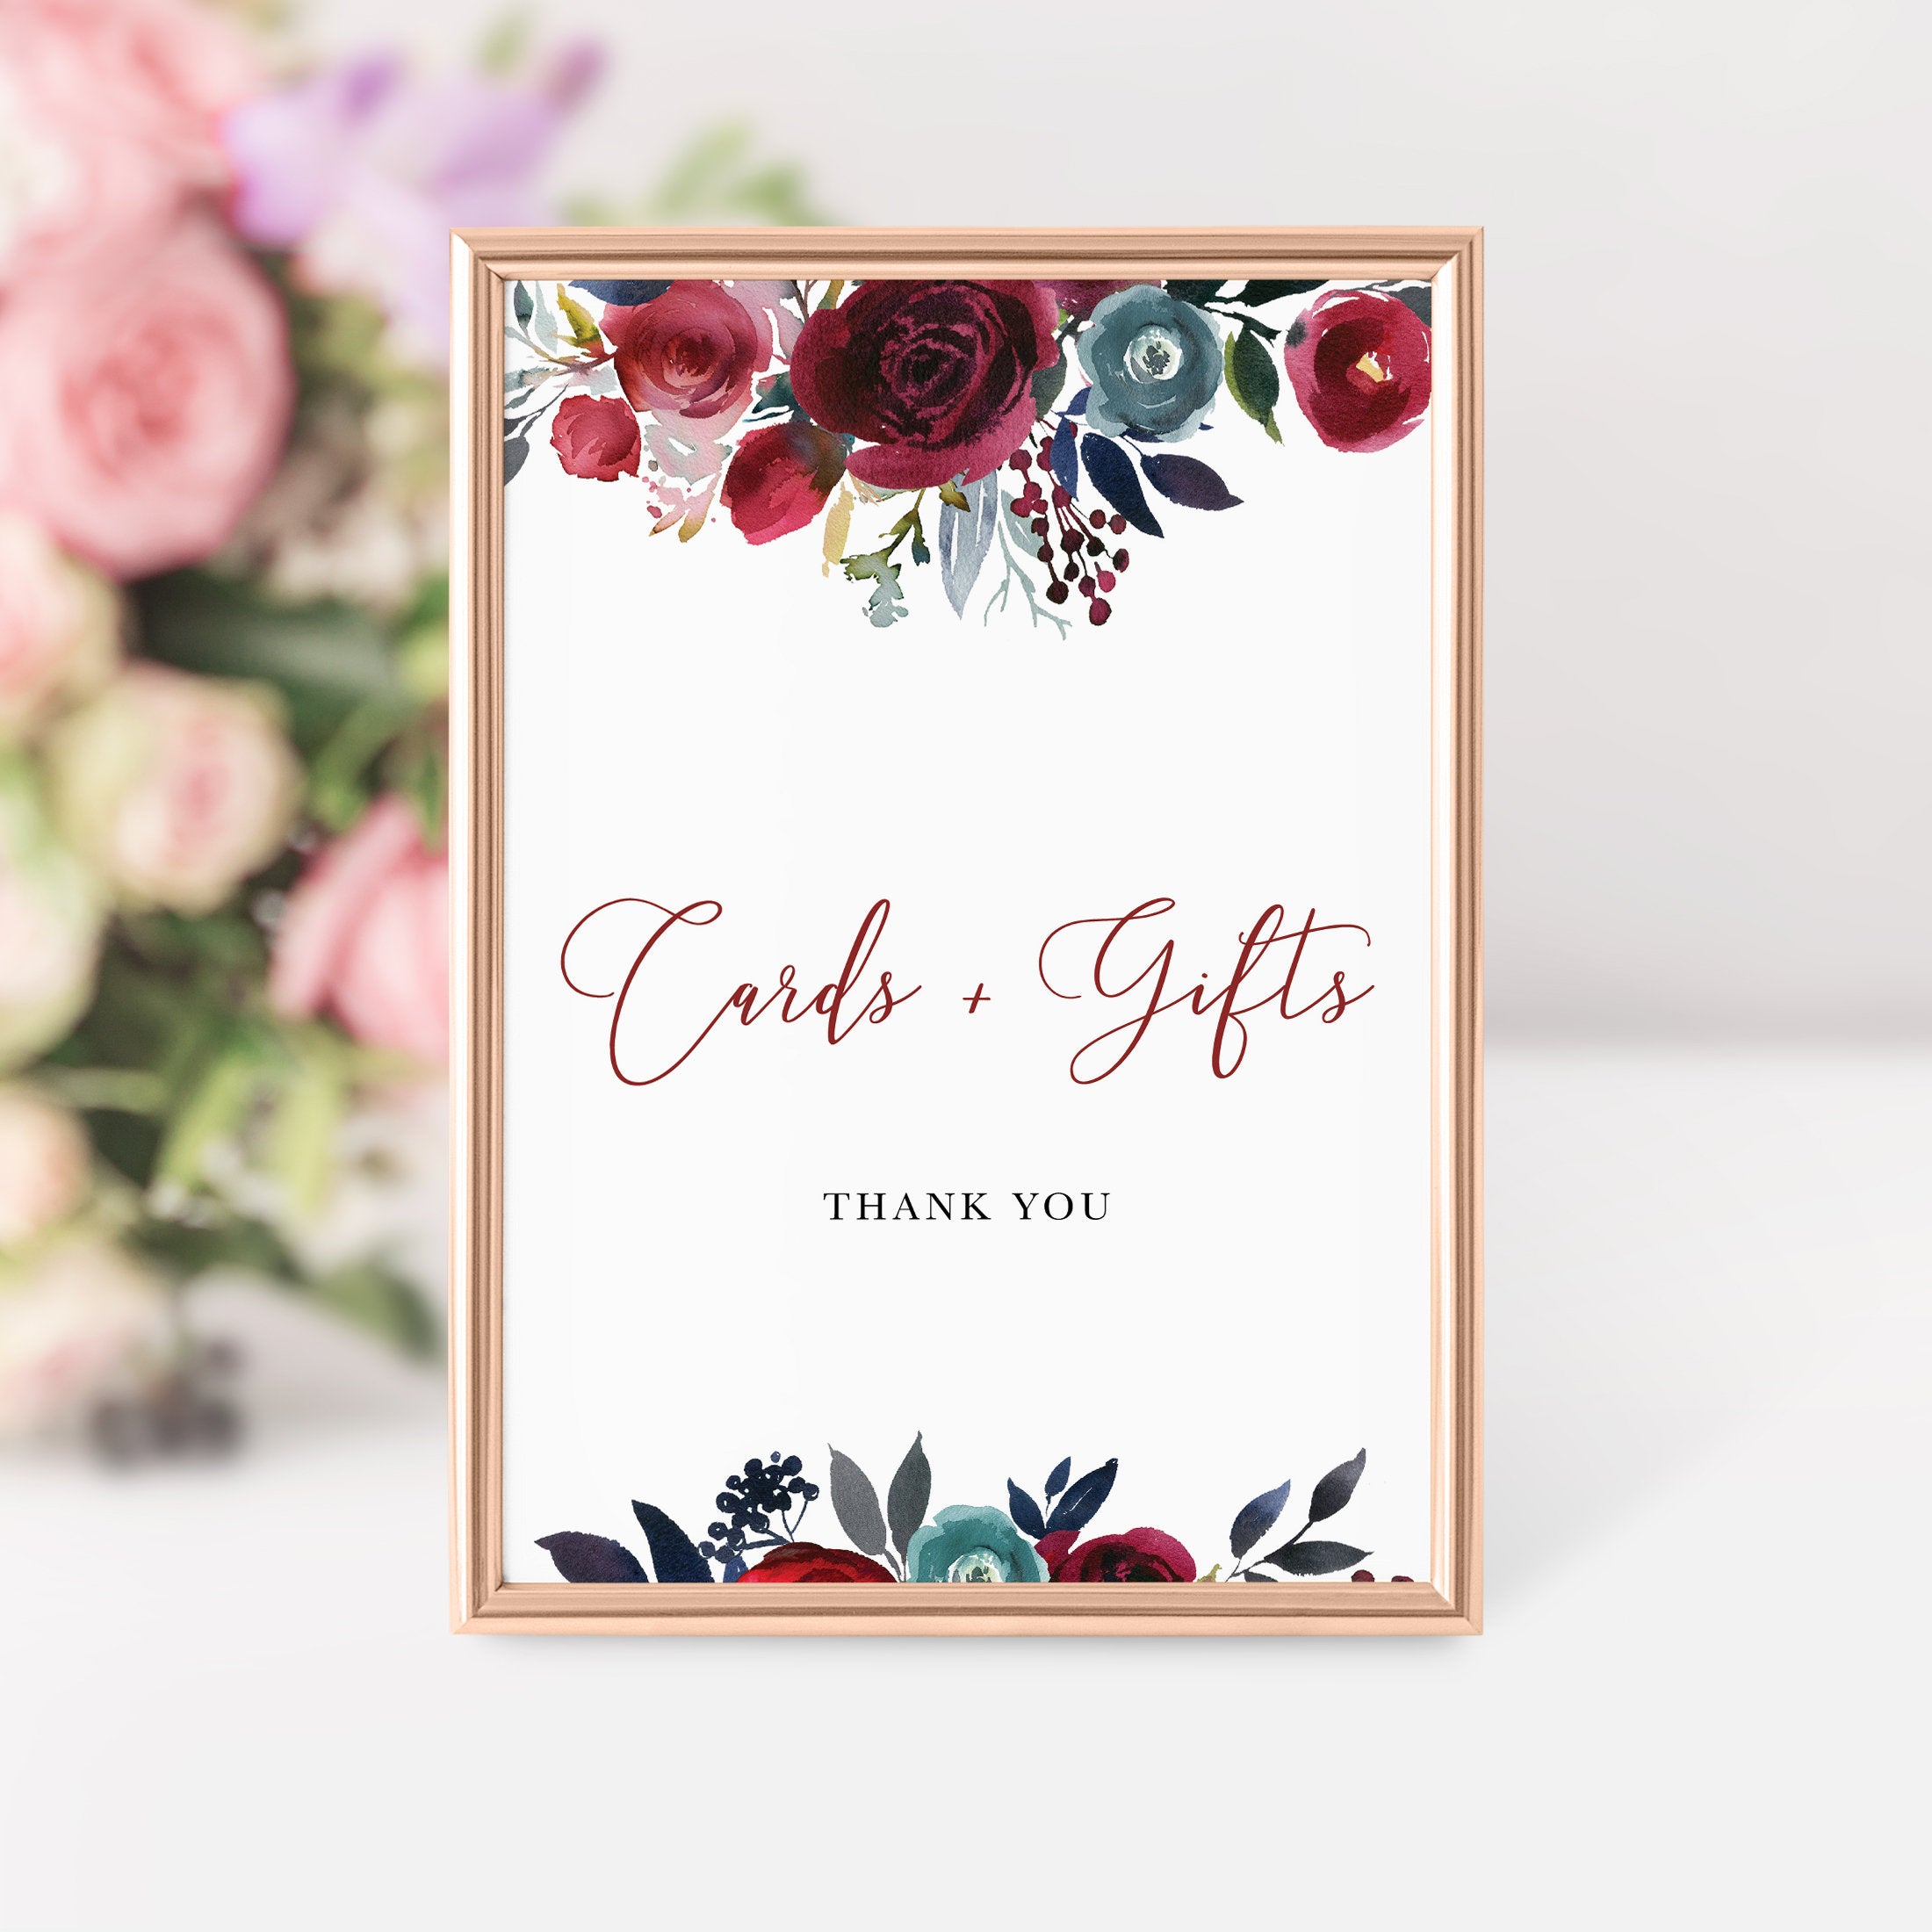 Burgundy Wedding Decor, Cards and Gifts Sign Printable, Burgundy and Navy Wedding, INSTANT DOWNLOAD - BB100 - @PlumPolkaDot 